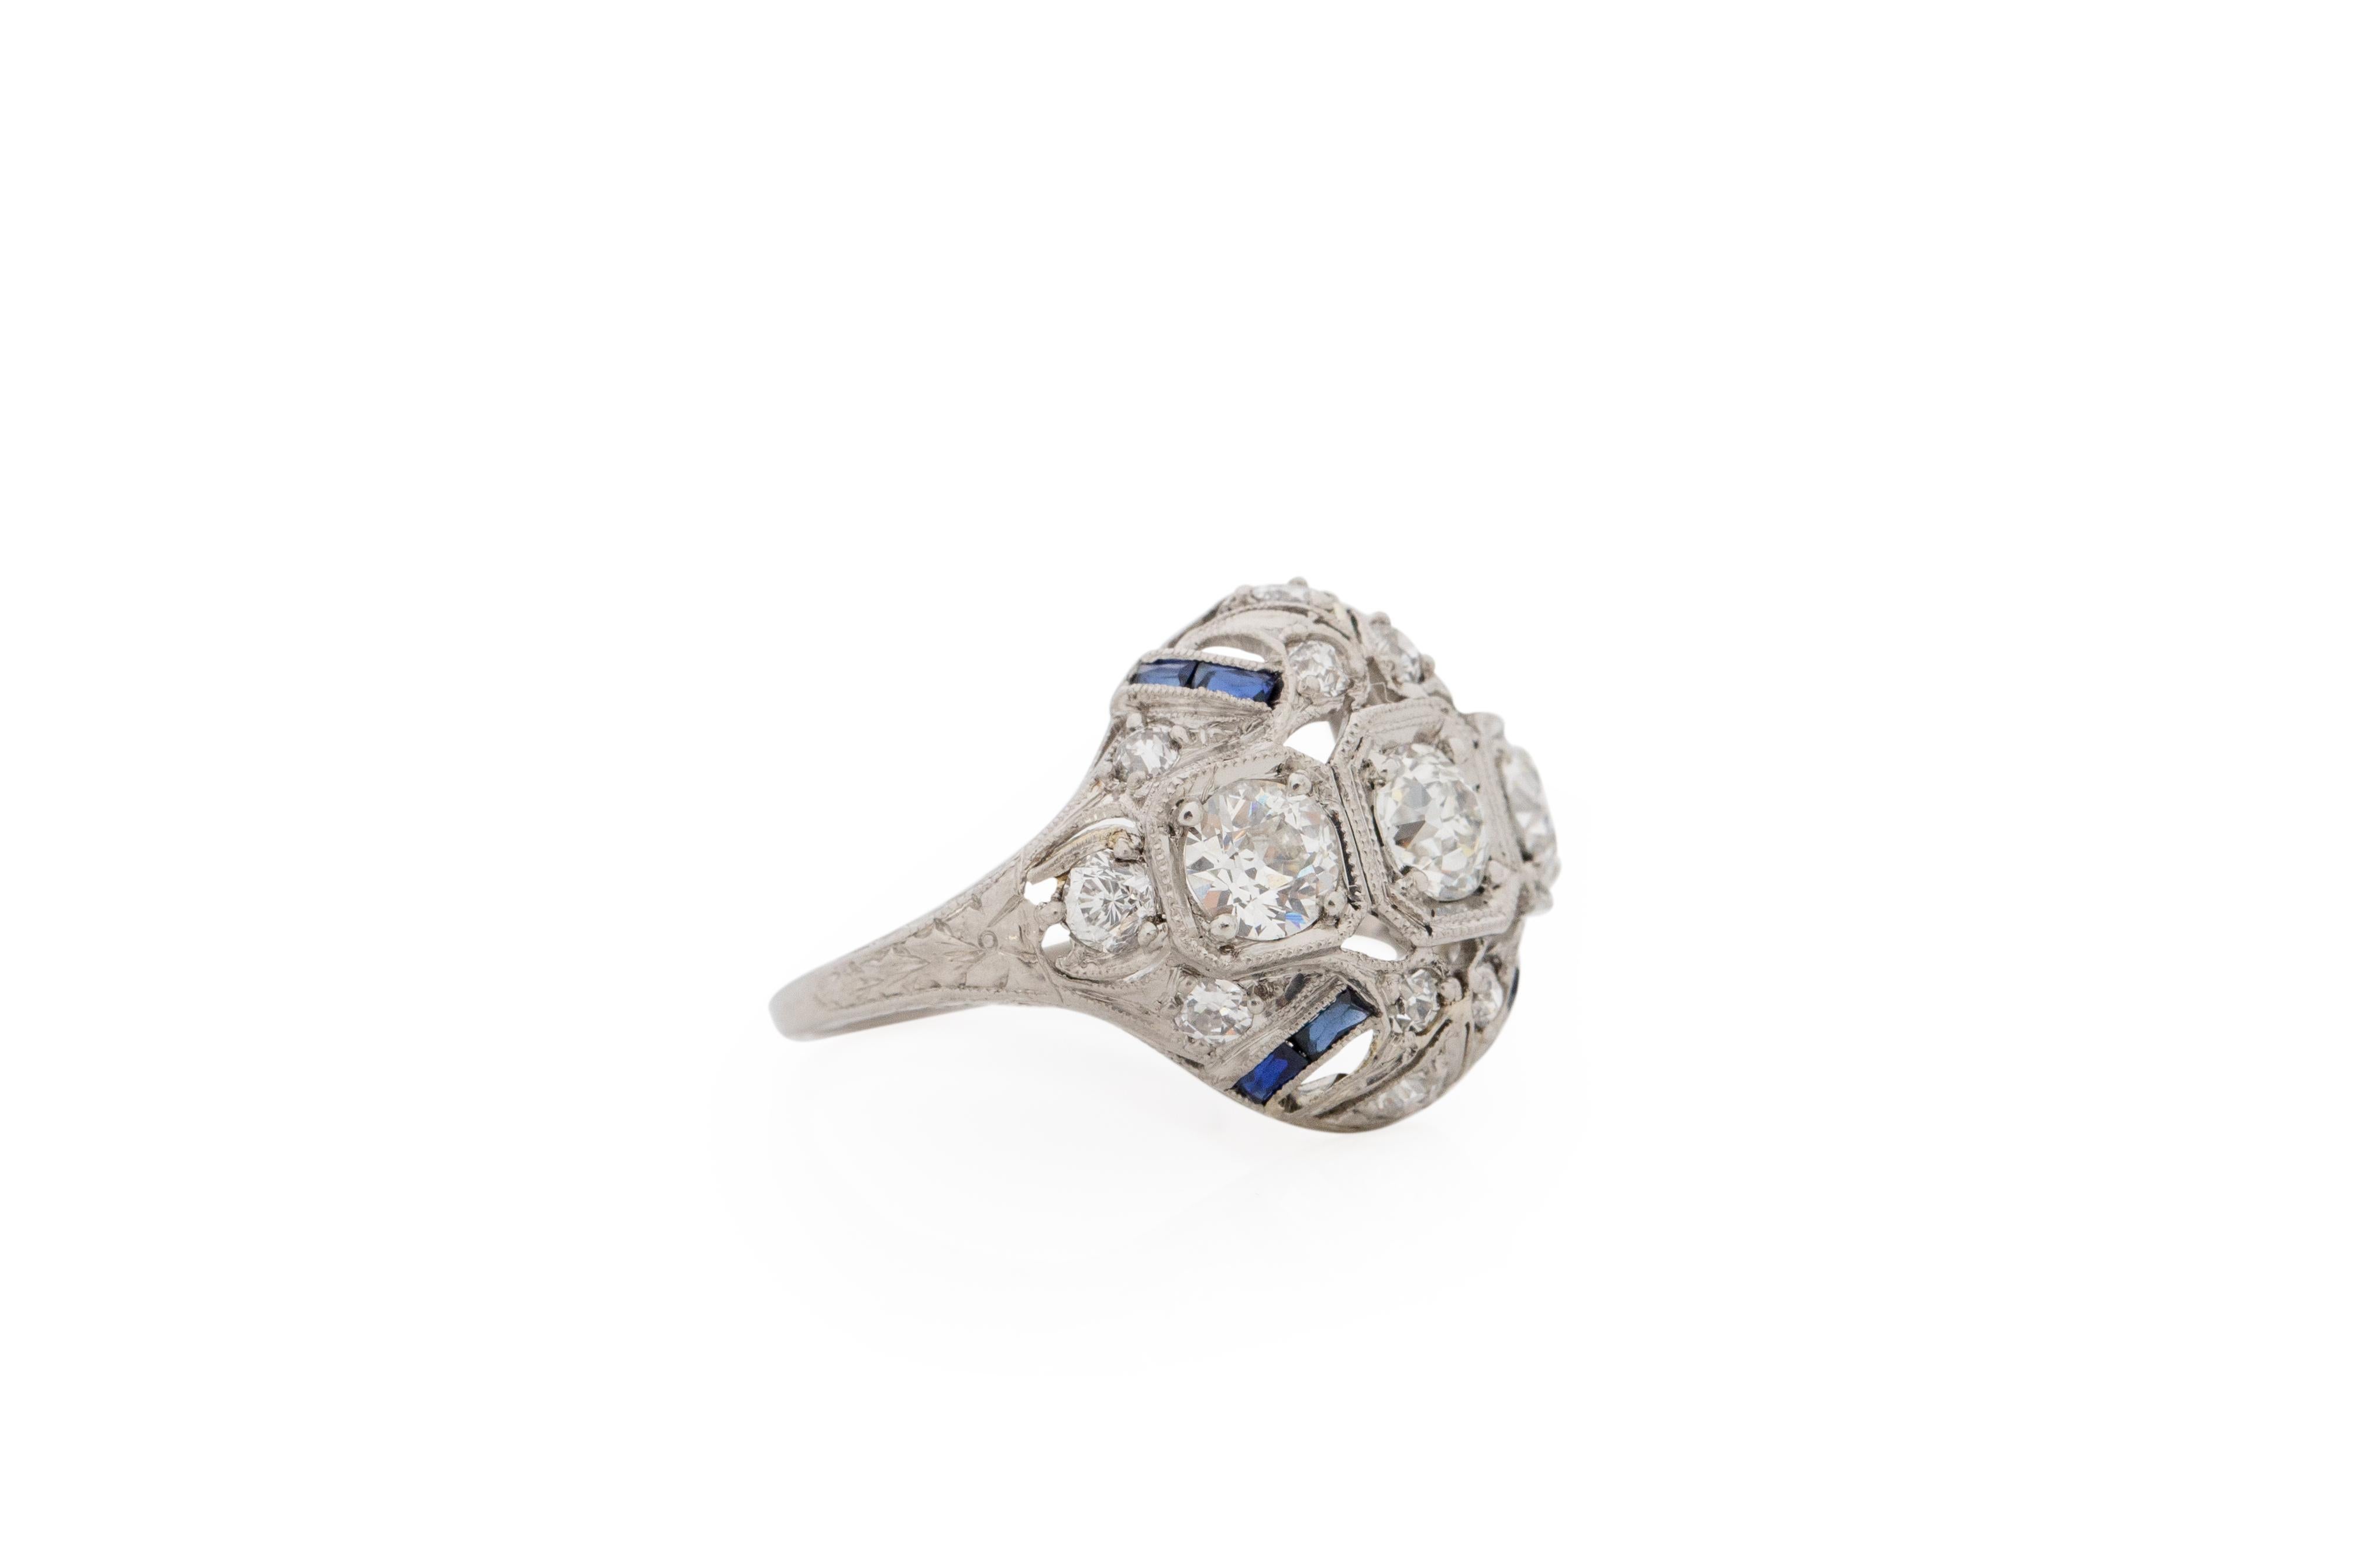 Item Details: 
Ring Size: 5
Metal Type: Platinum [Hallmarked, and Tested]
Weight: 4.2 grams

Diamond Details:
Weight: 1.25 carat, total weight
Cut: Old European brilliant
Color: G-H
Clarity: VS

Sapphire Details:
French Cut, .25 carat total weight,